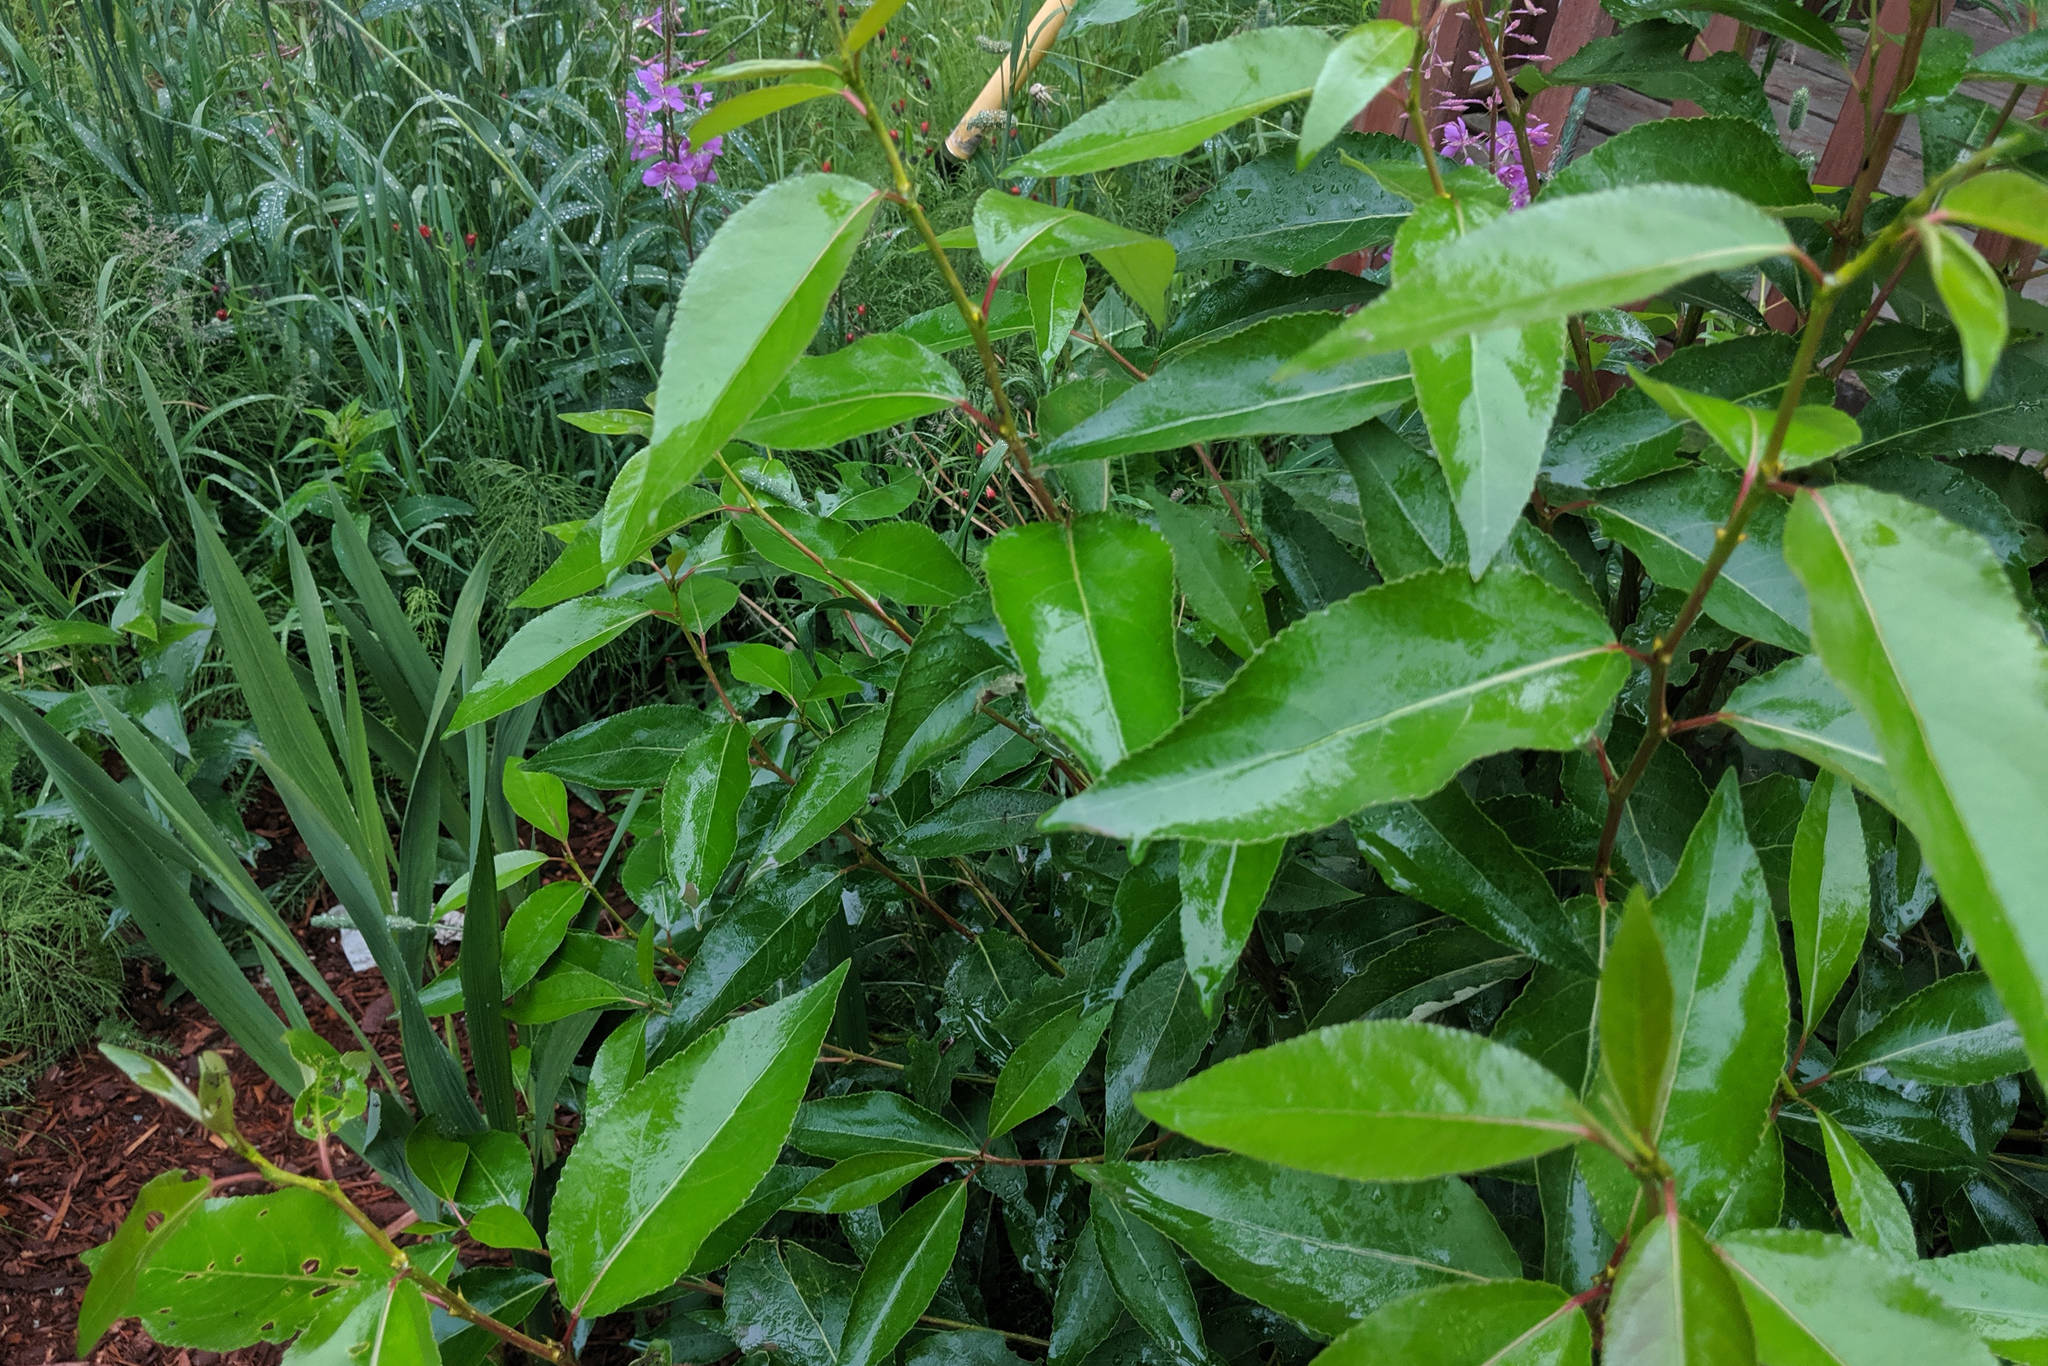 Water can be seen on foliage after a rainstorm on July 14, 2019, in Kalifornsky, Alaska. The last significant rain to fall on the peninsula was July 26-28. (Photo by Erin Thompson/Peninsula Clarion)